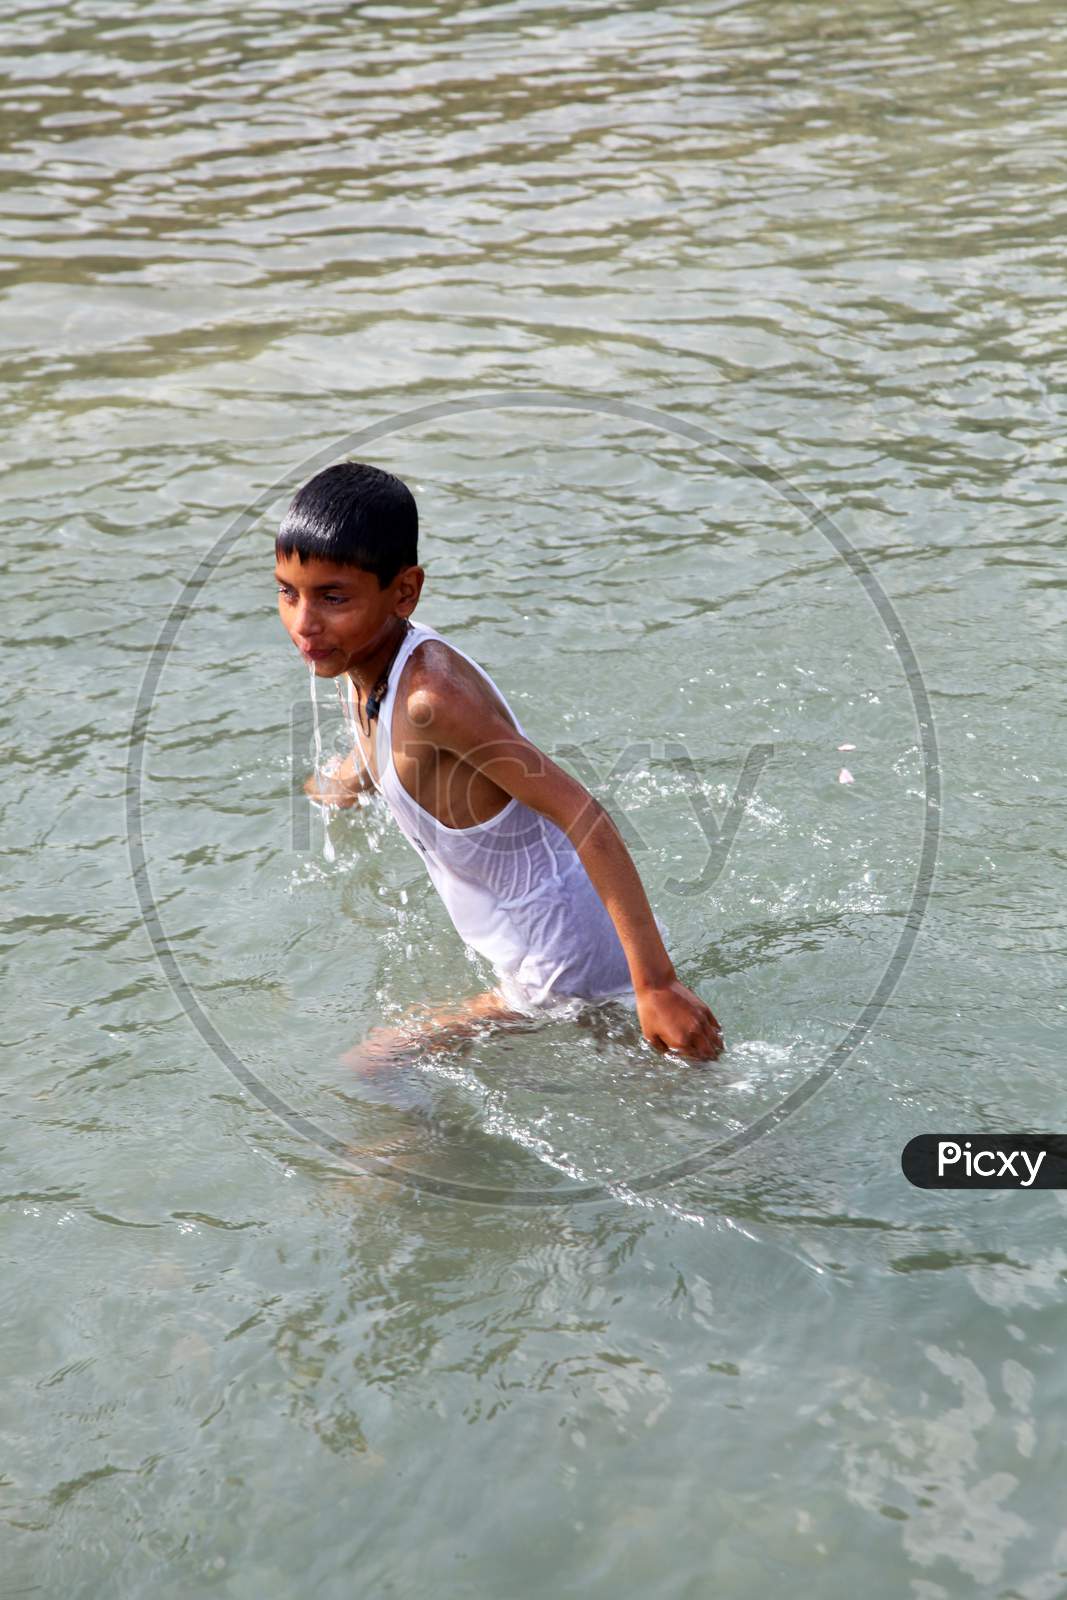 An Indian Kid in Water